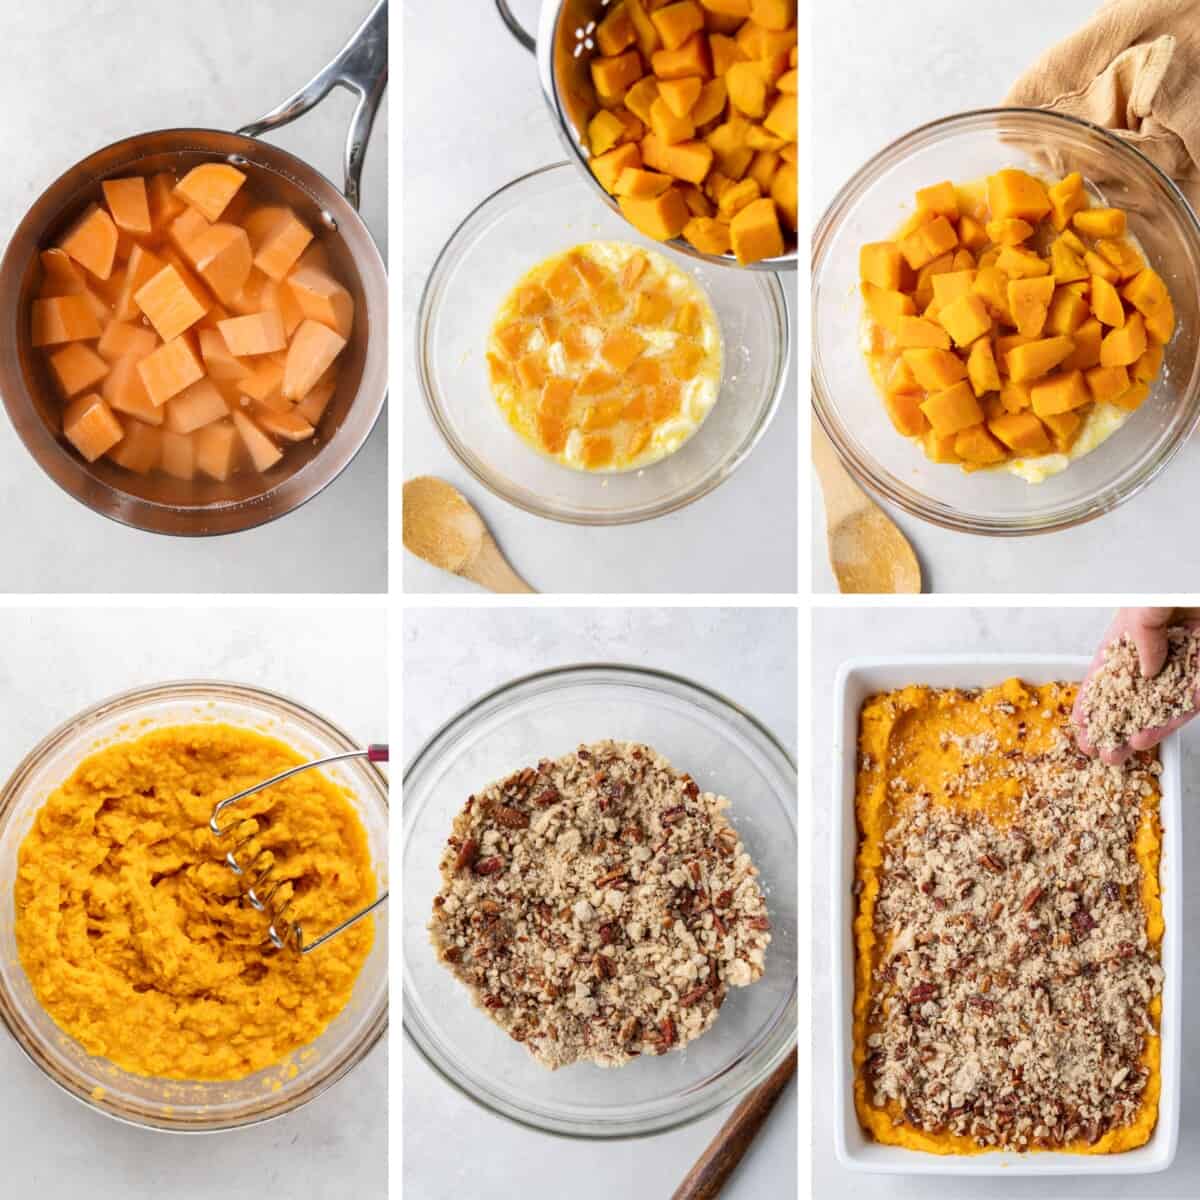 A grid of process images showing the individual steps in making sweet potato casserole.